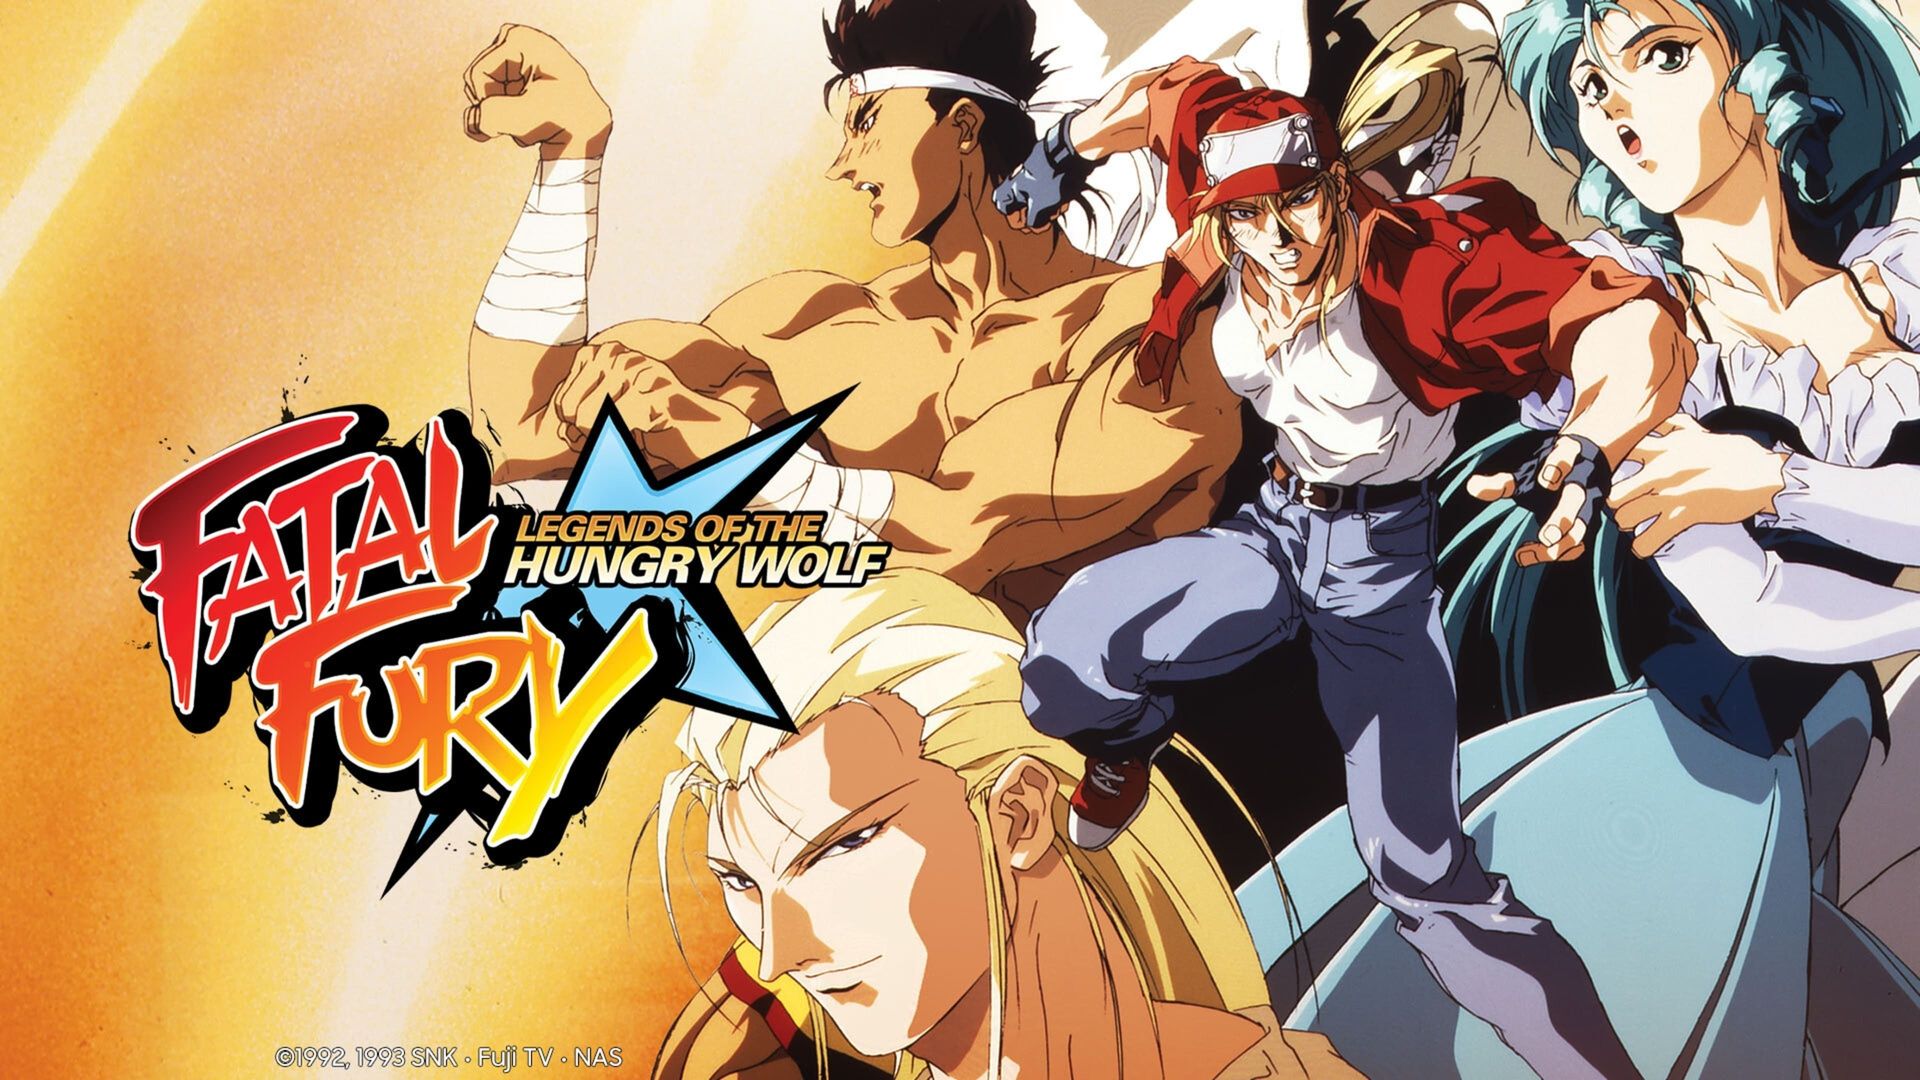 Fatal Fury: Legend of the Hungry Wolf background